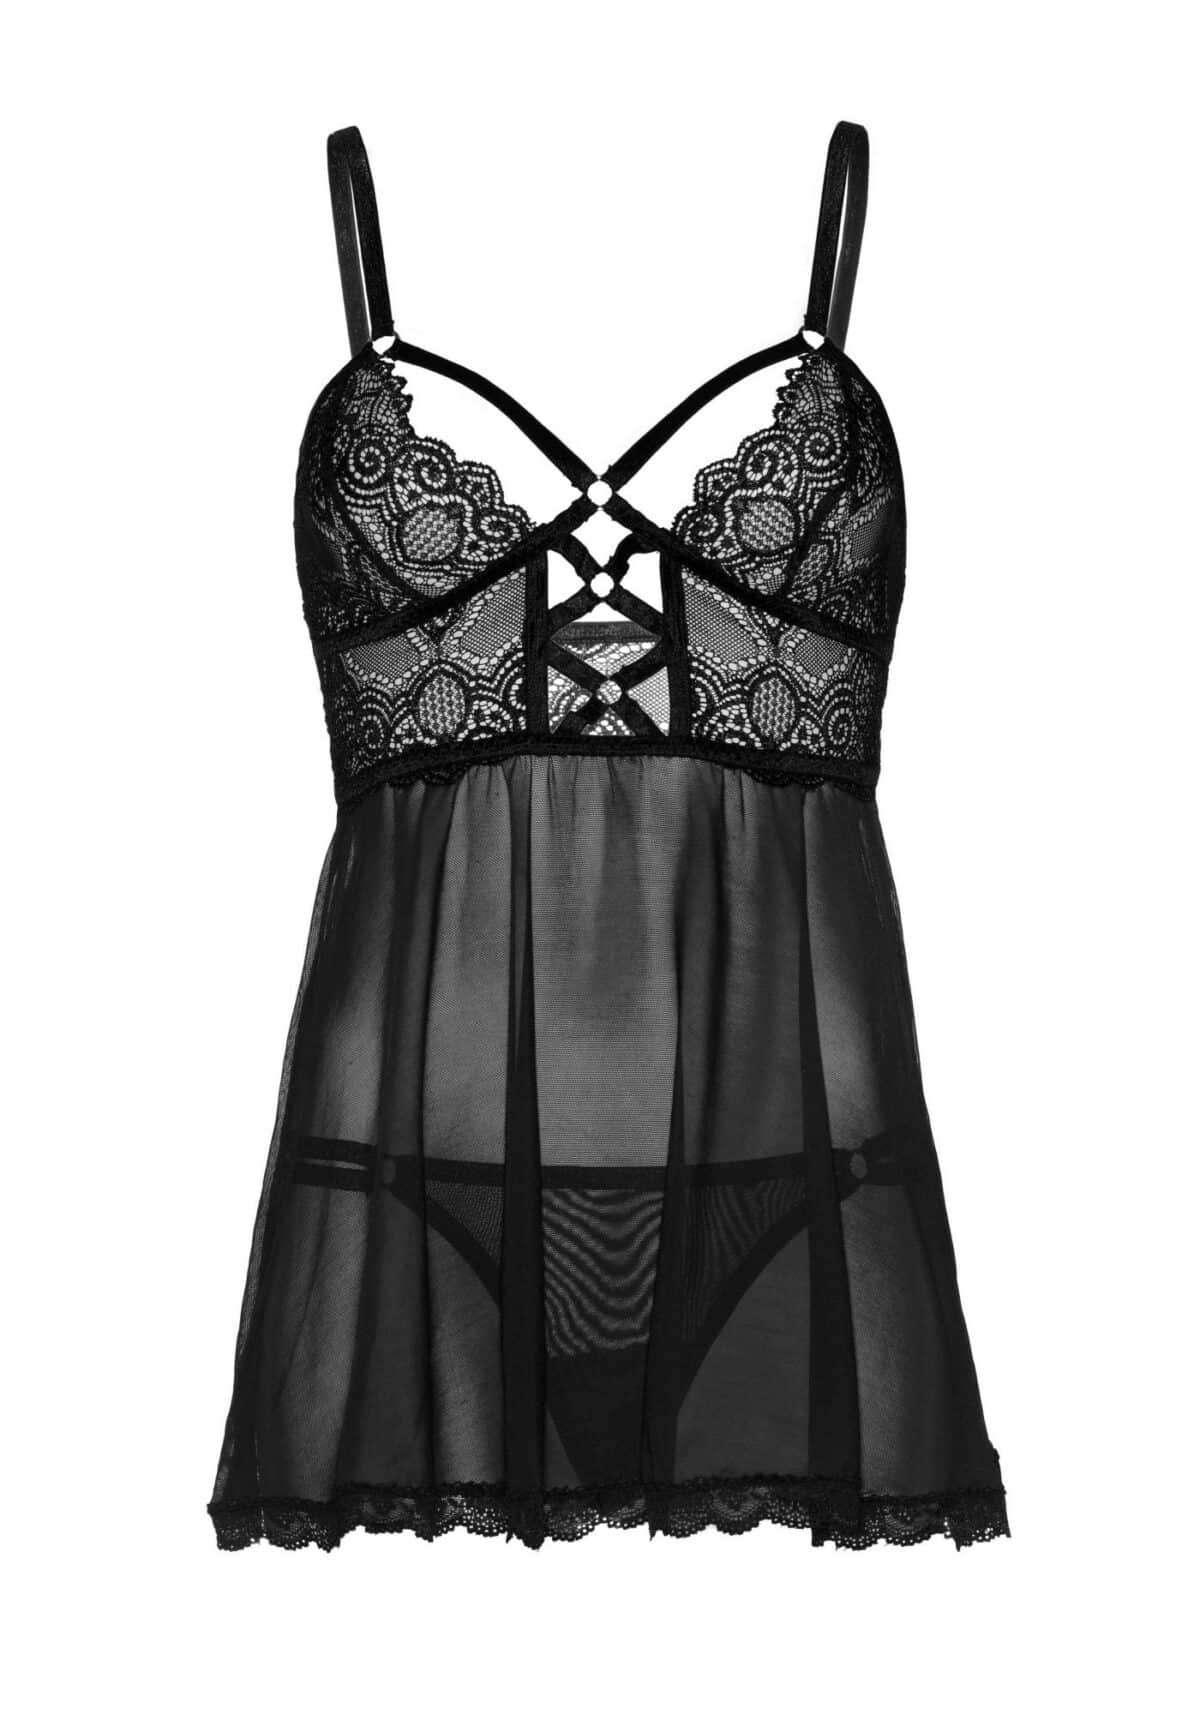 Sheer lace babydoll and string